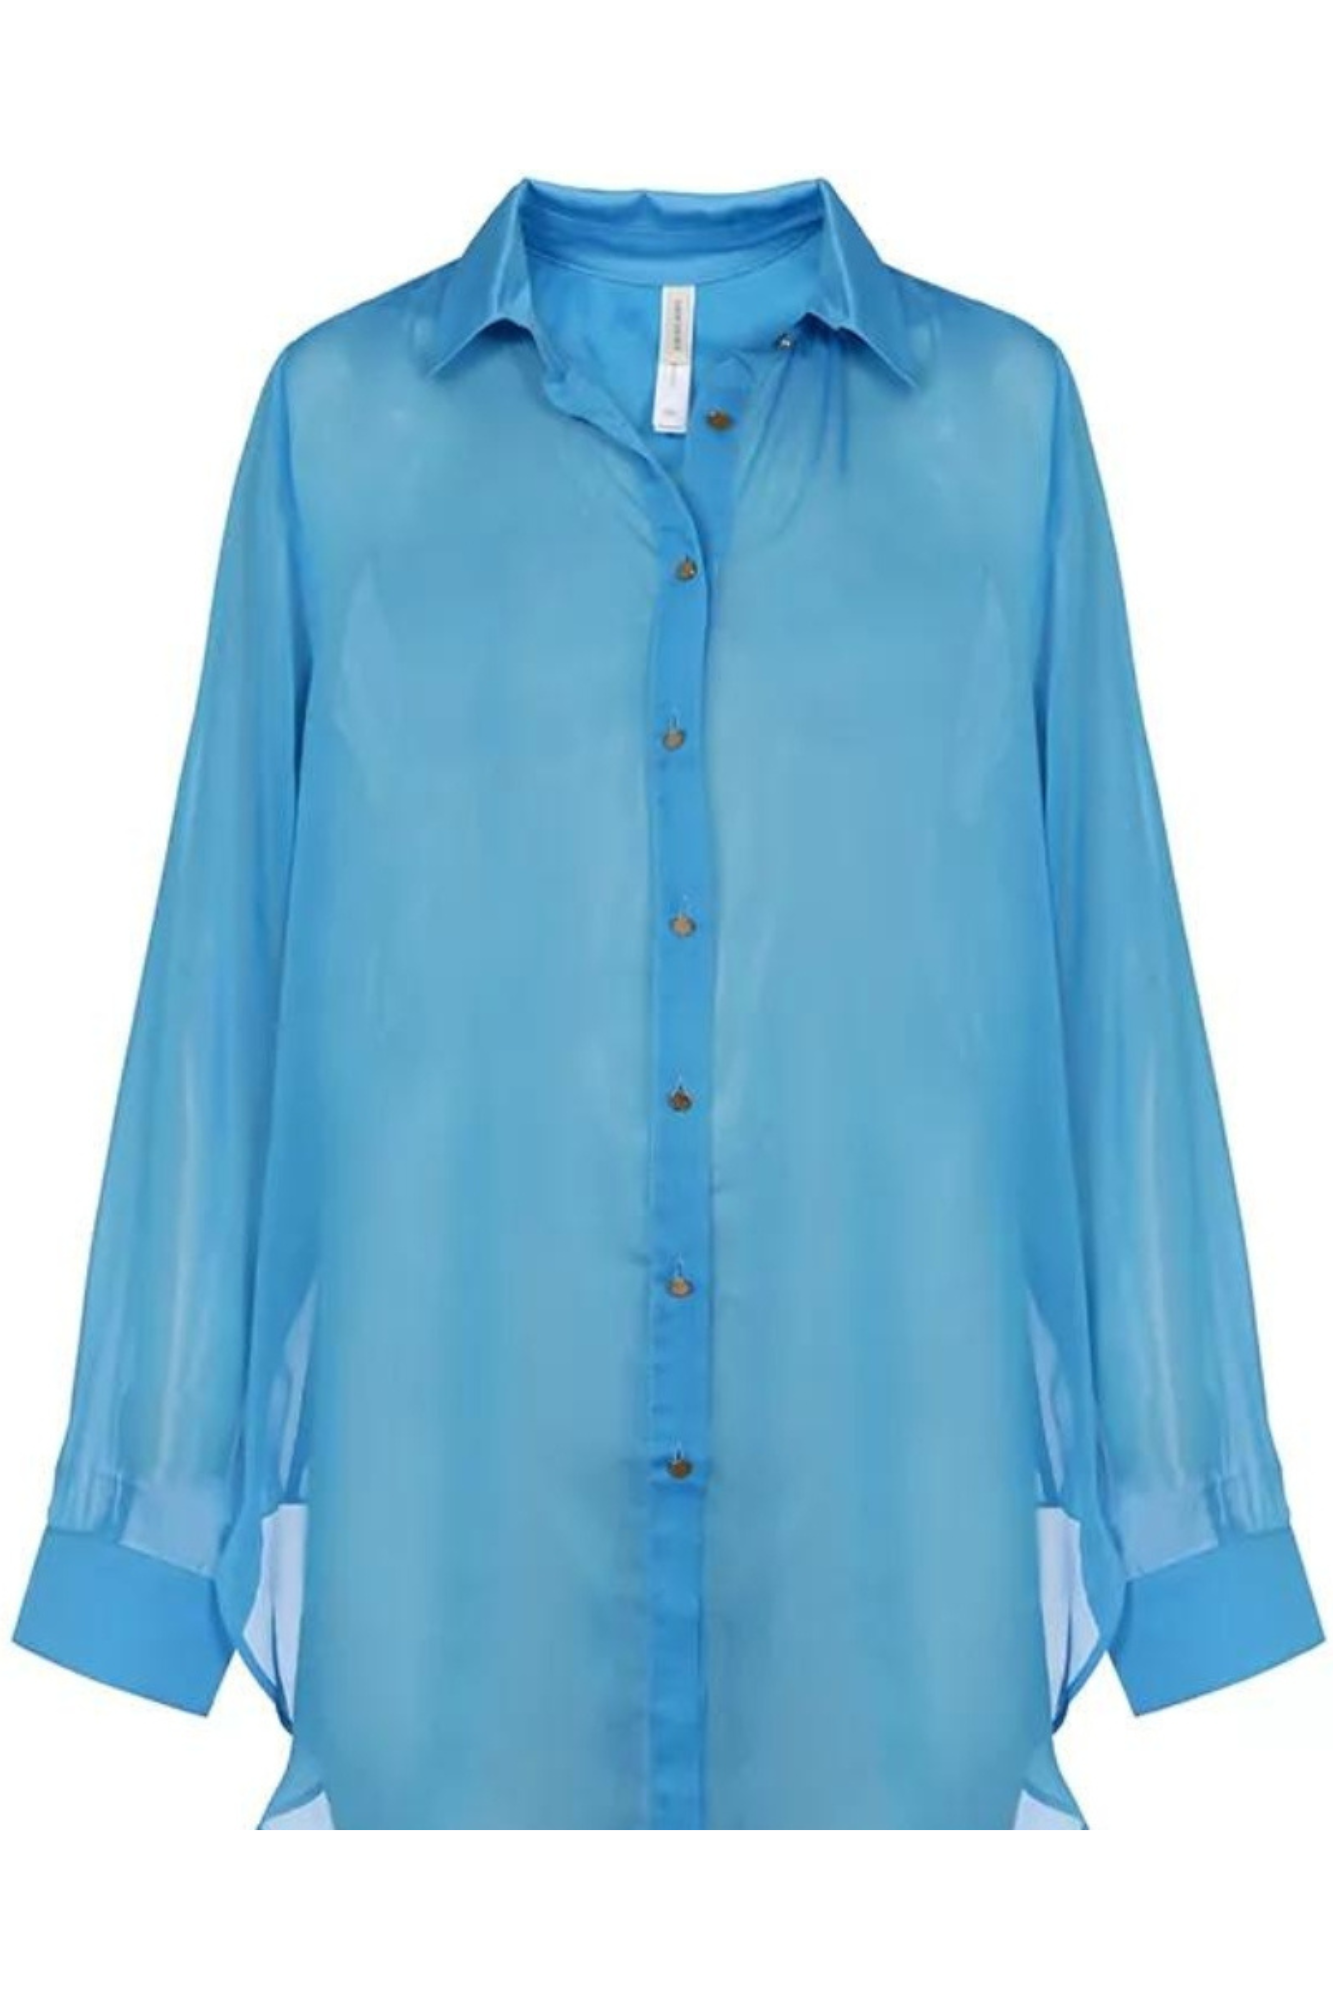 Jonas Buttoned Shirt in Turquoise